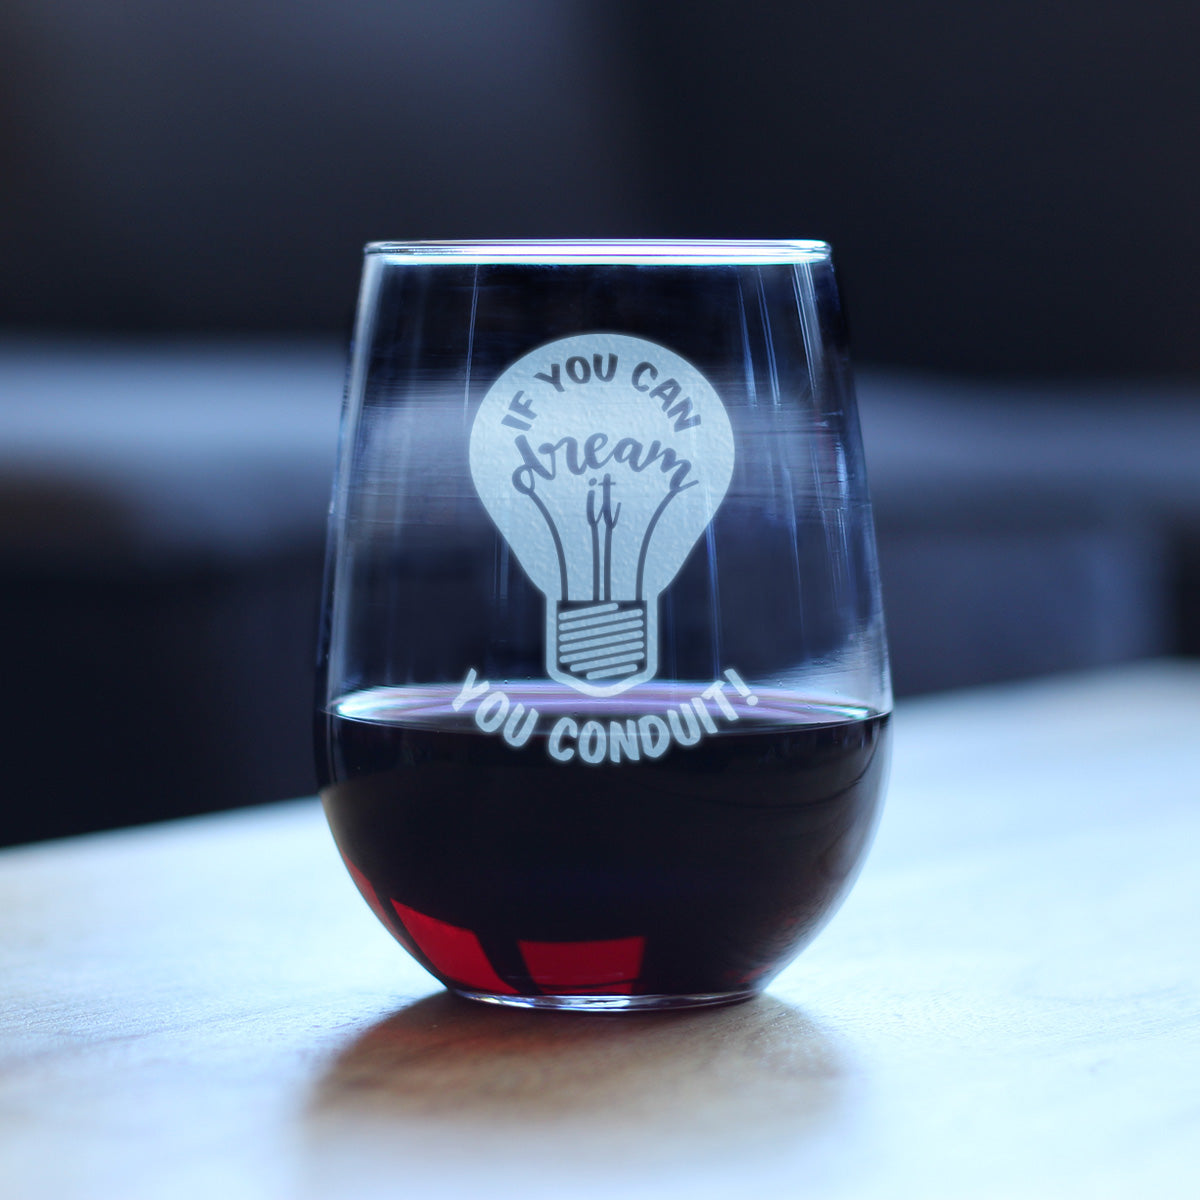 If You Can Dream You Conduit - Stemless Wine Glass - Funny Electrician Gifts for Journeyman - Large 17 Oz Glass